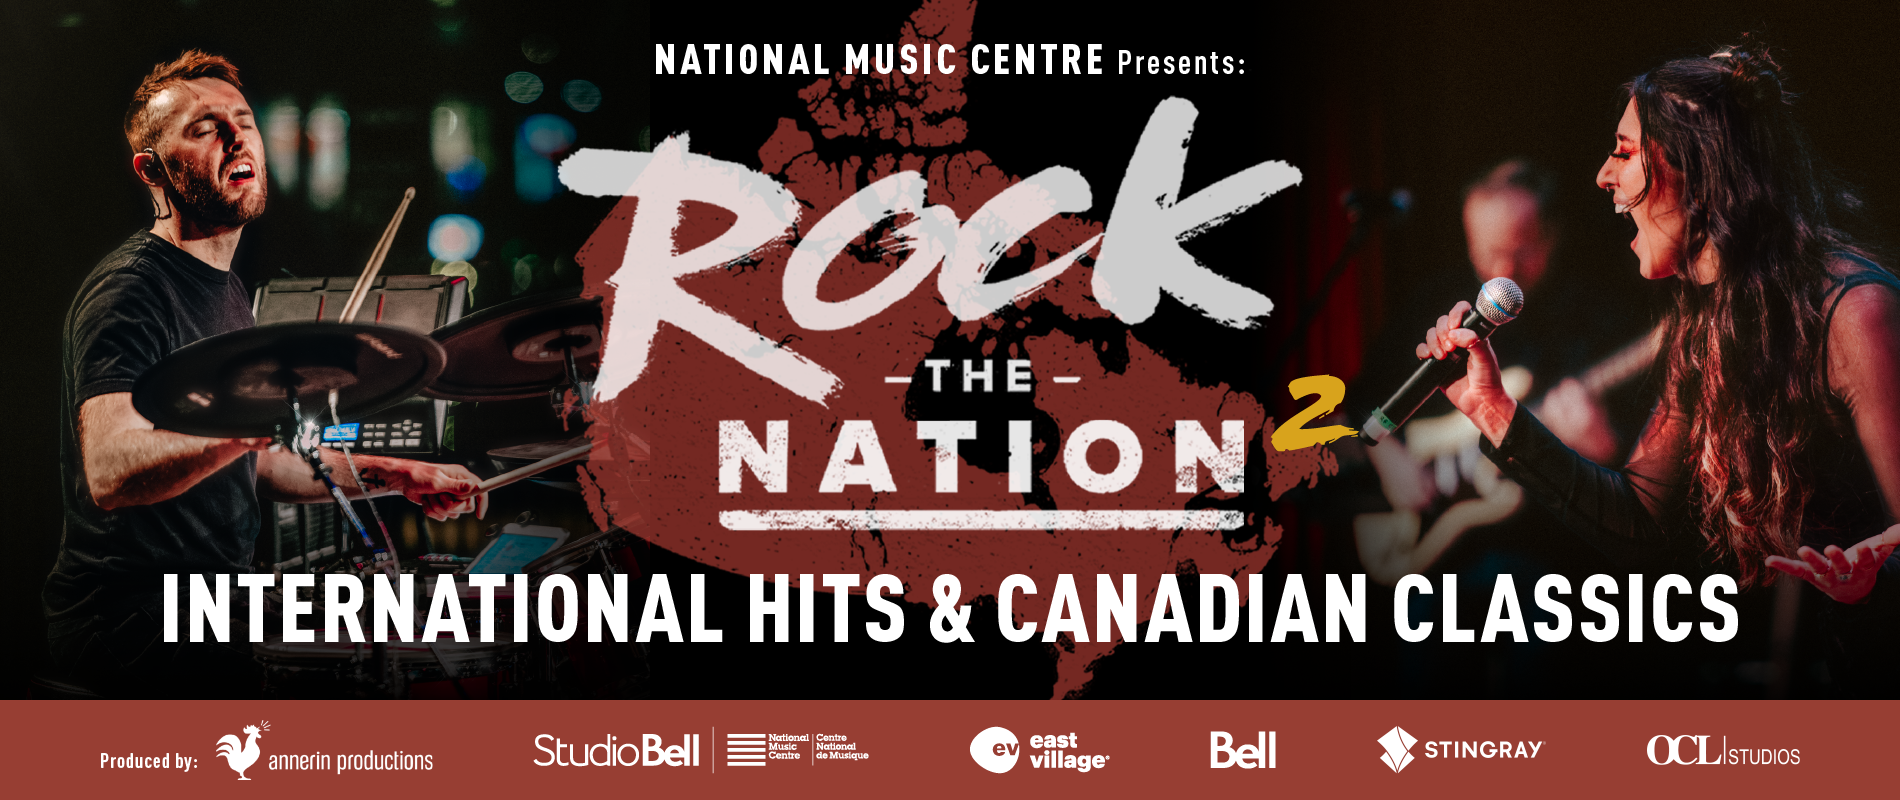 NMC Presents: Rock the Nation — International Hits and Canadian Classics